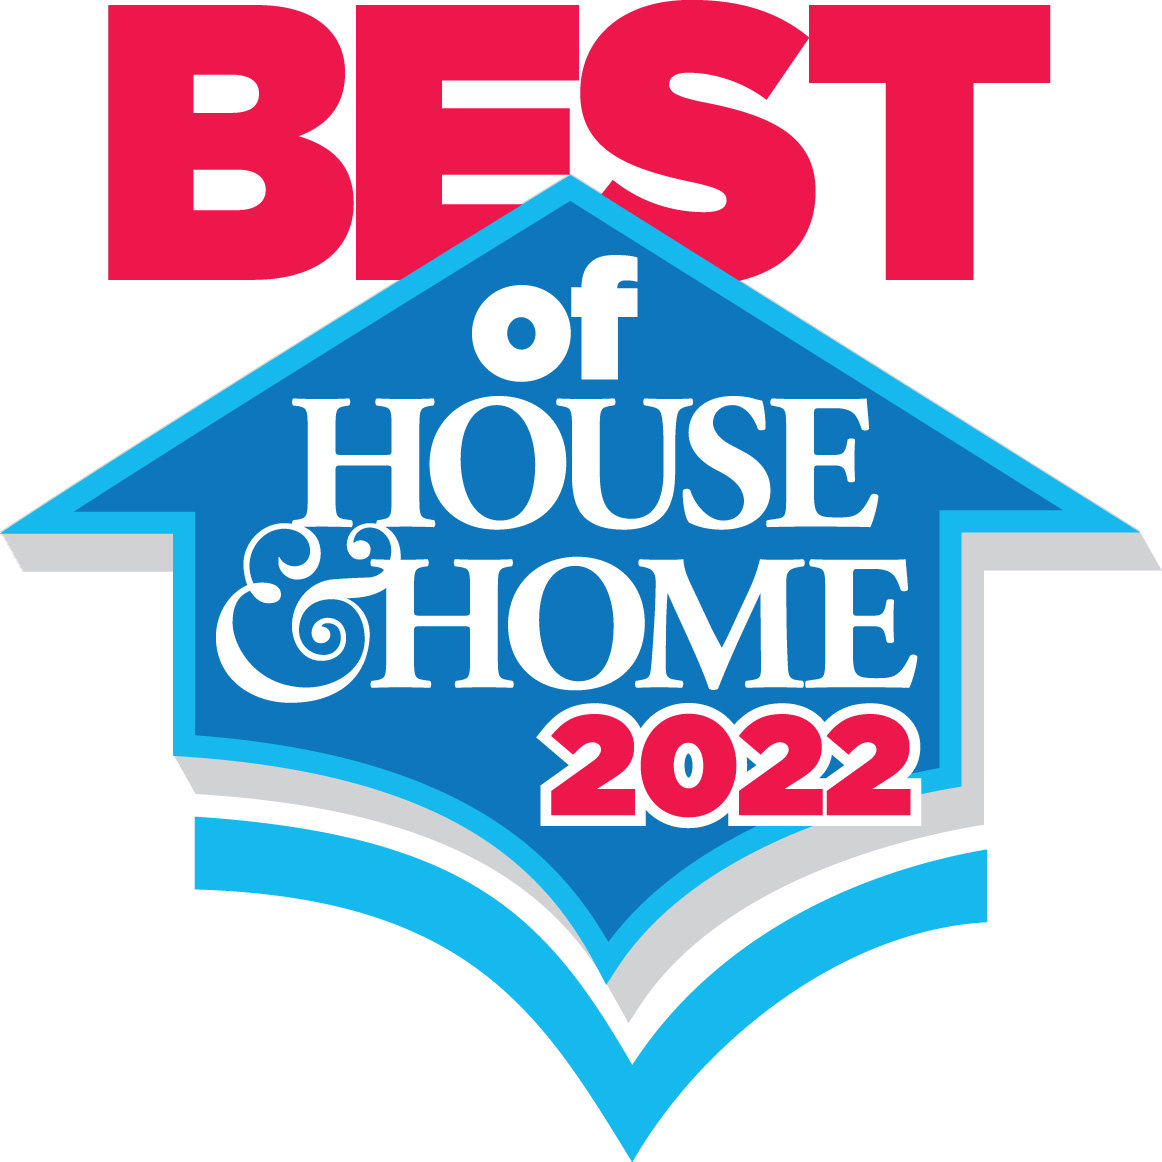 Best of House & Home 2022